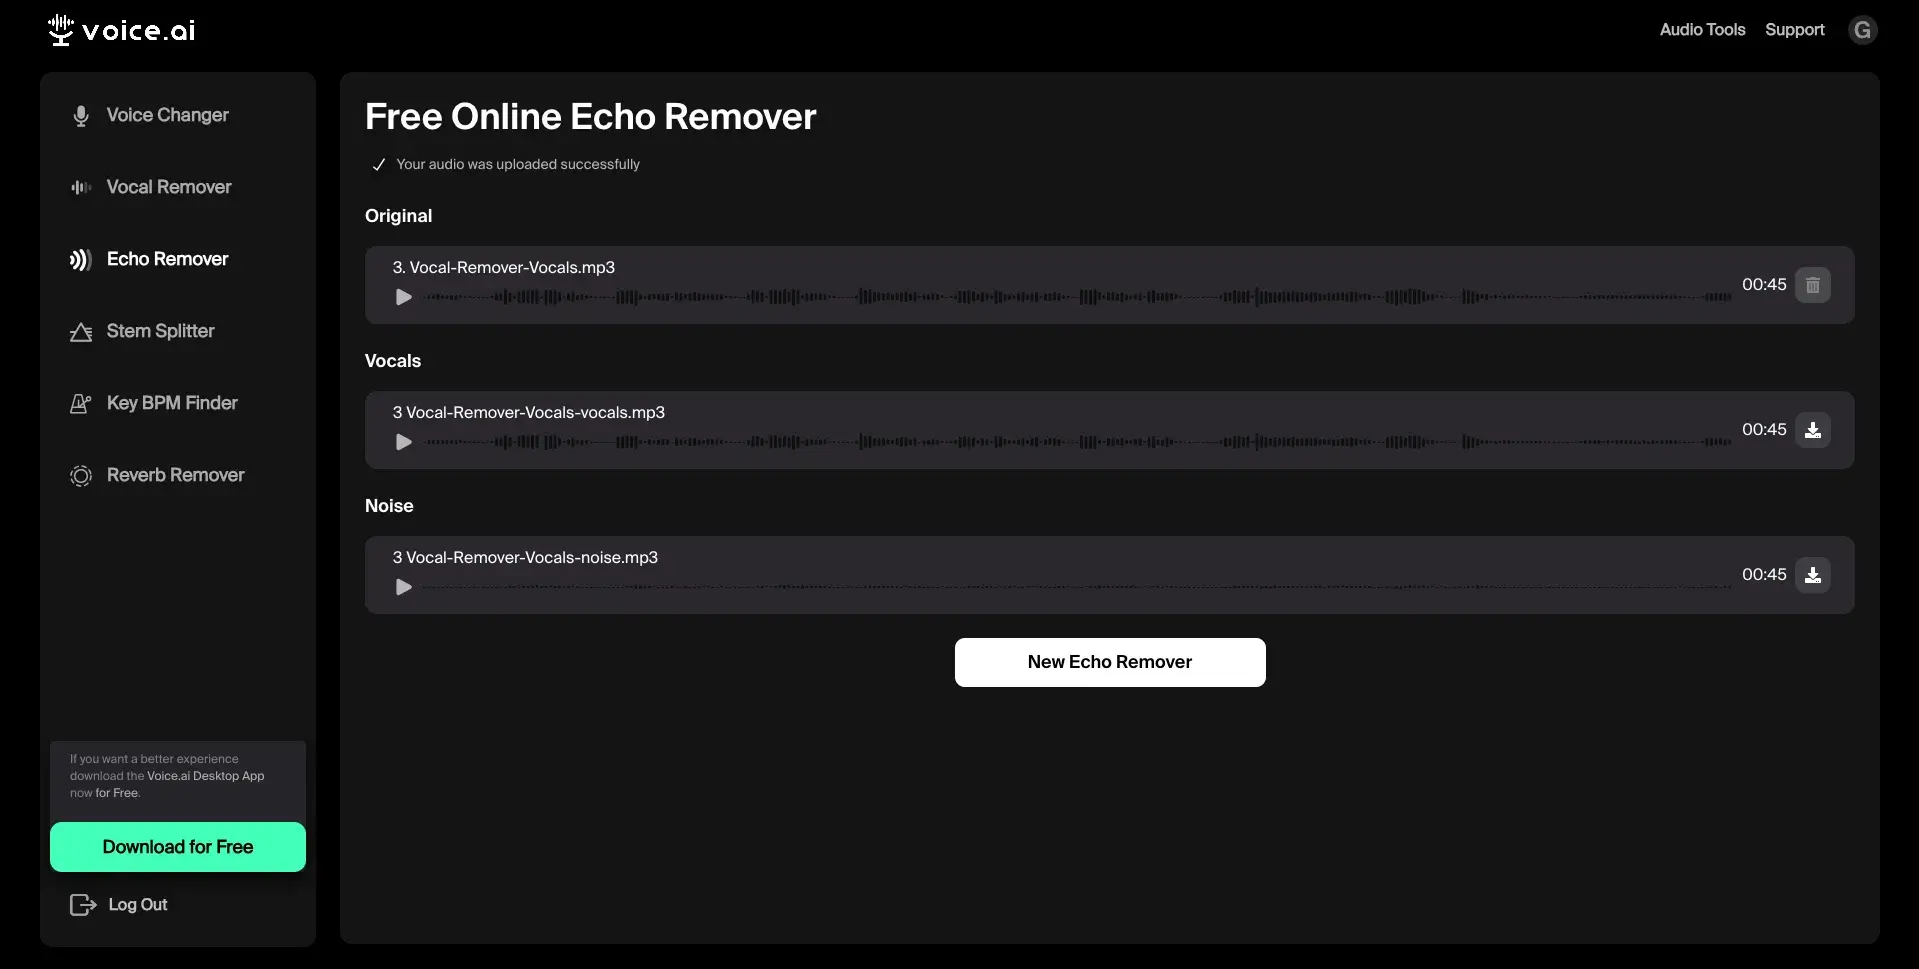 Echo Remover Results